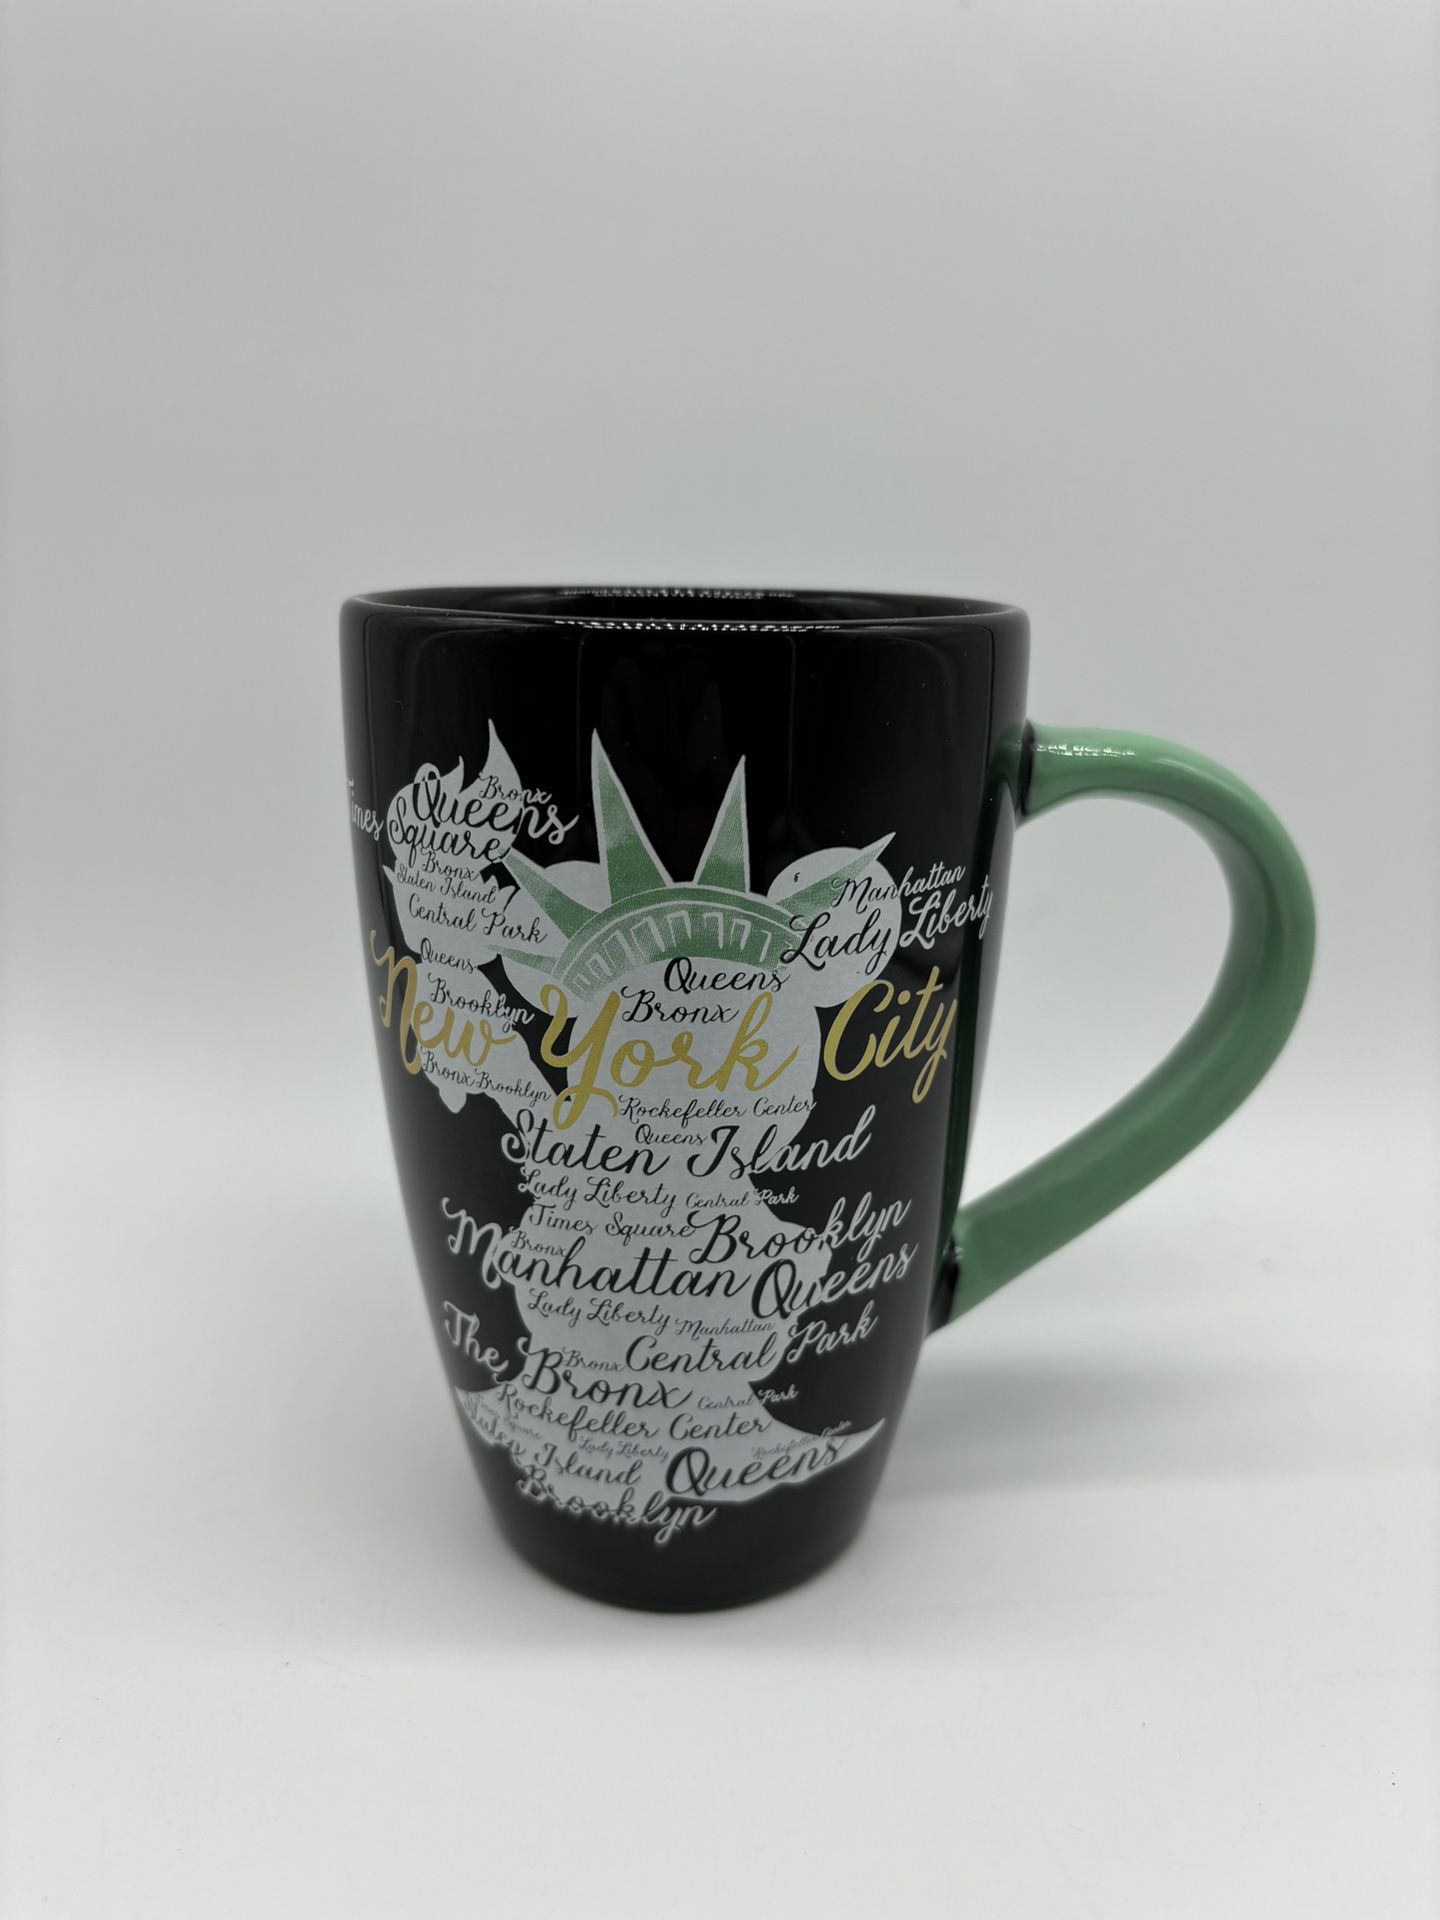 Disney Store NYC  Official Mug Minnie Mouse Statue of Liberty Black Green